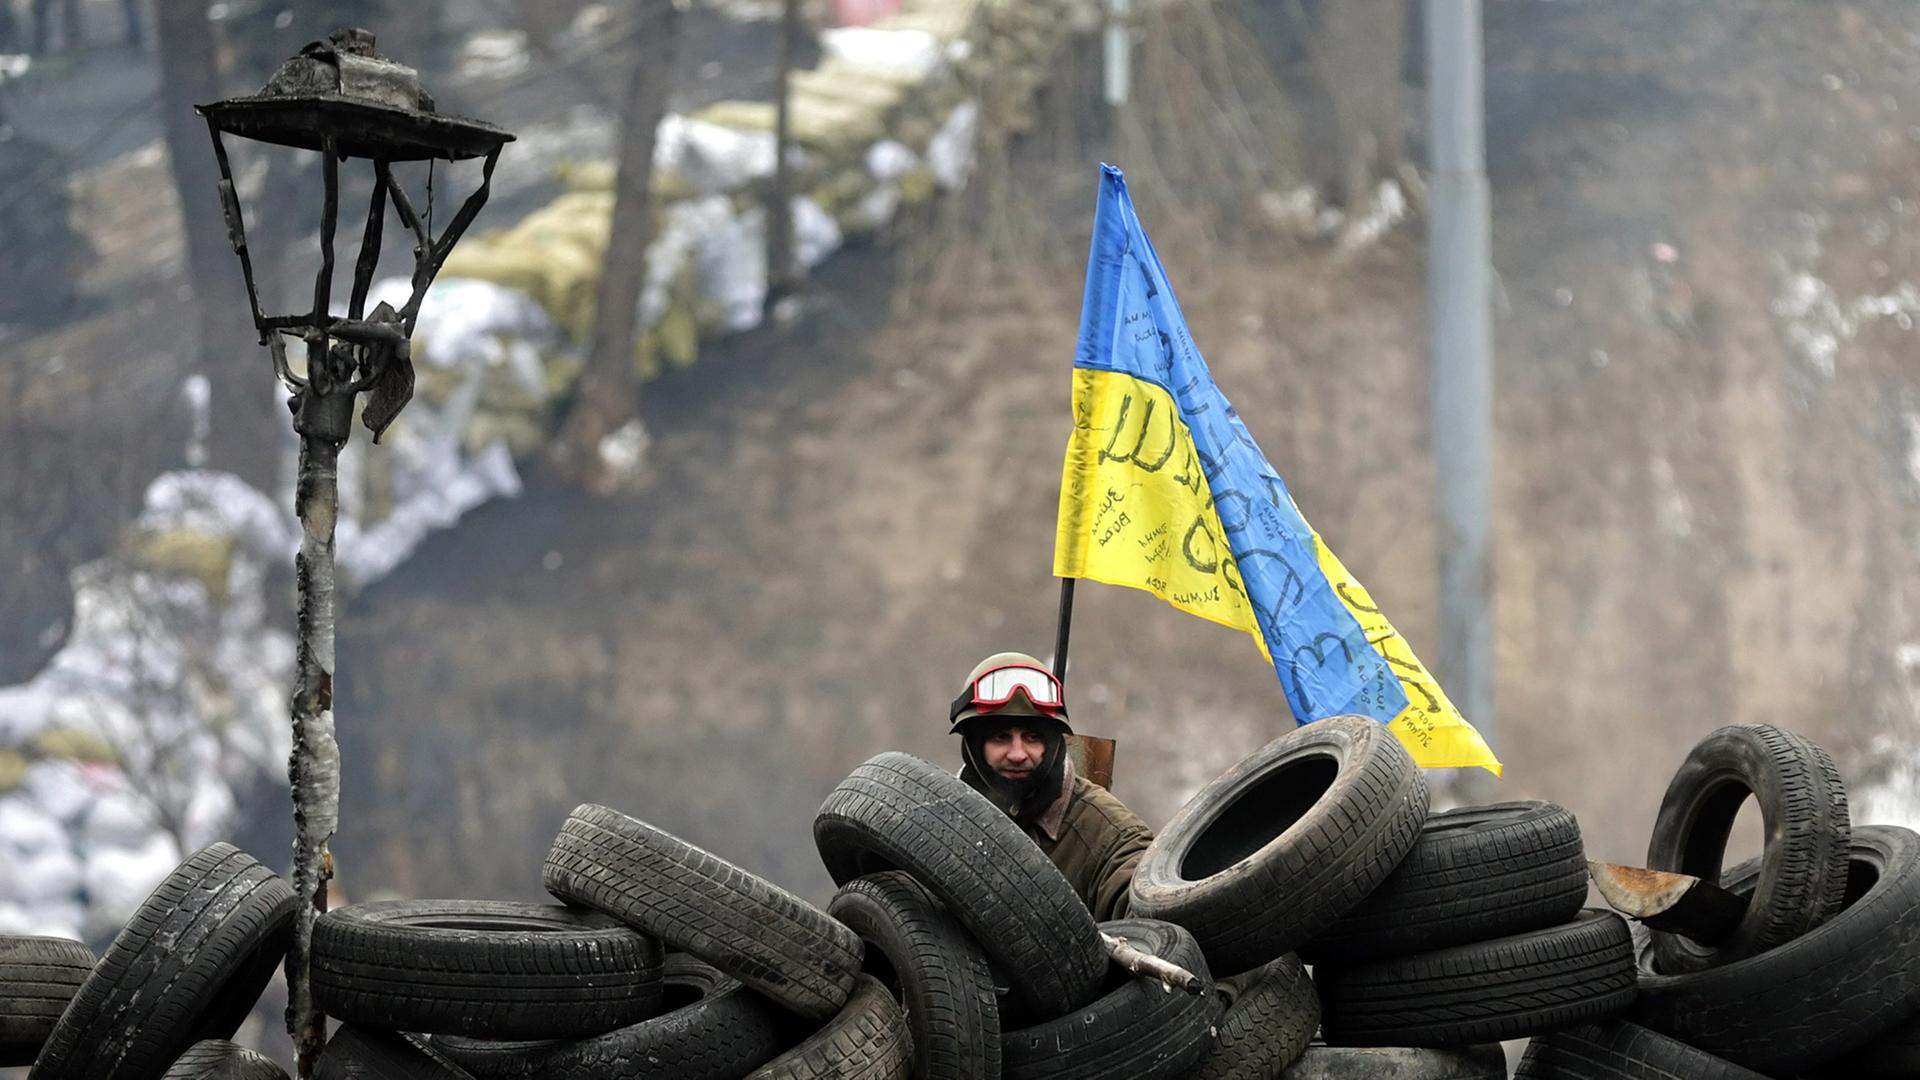 A single protester stands behind a barricade of tires during another day of anti-government protest in Kiev, Ukraine, 28 January 2014. Ukraine's parliament in an extraordinary session on 28 January has repealed a series of laws that have been criticized as stifling dissent and free speech. Ukraine has seen violent protests since November 2013. The demonstrations have been led by pro-Europe activists angry that President Viktor Yanukovych had decided against an association agreement with the European Union in favour of closer relations with Russia.